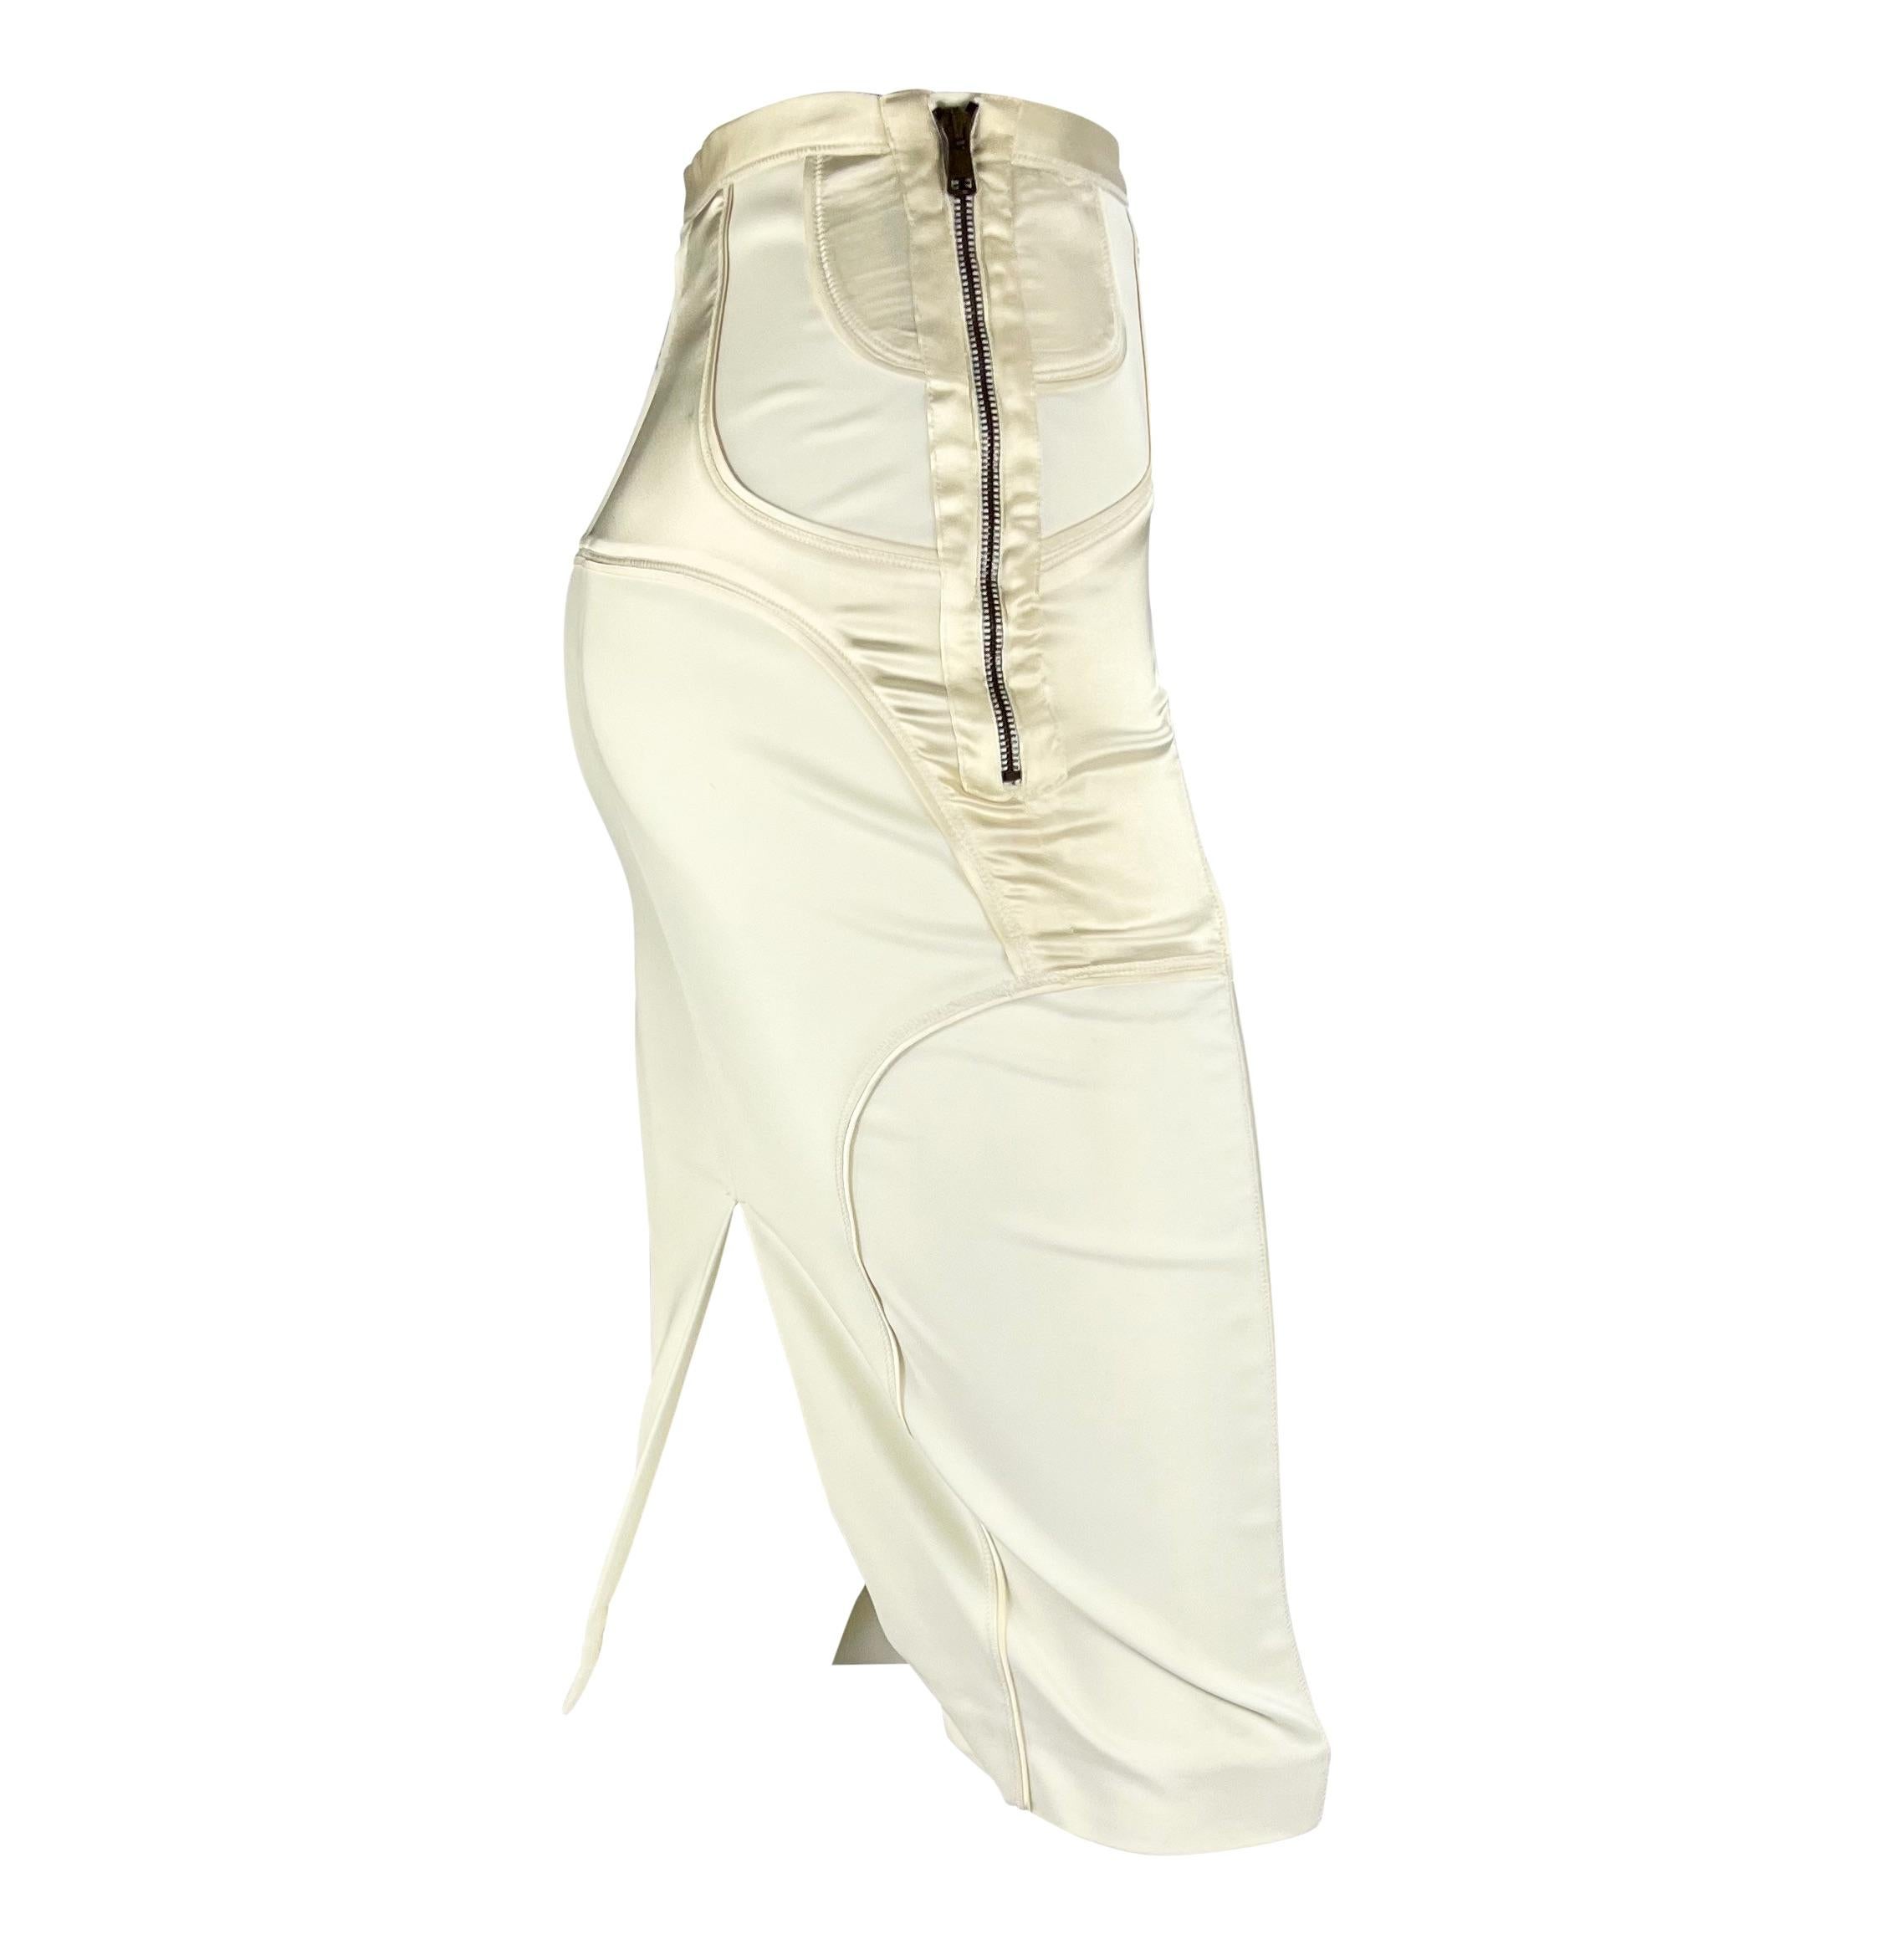 Women's F/W 2003 Gucci by Tom Ford White Satin Panel Zip Stretch Skirt For Sale